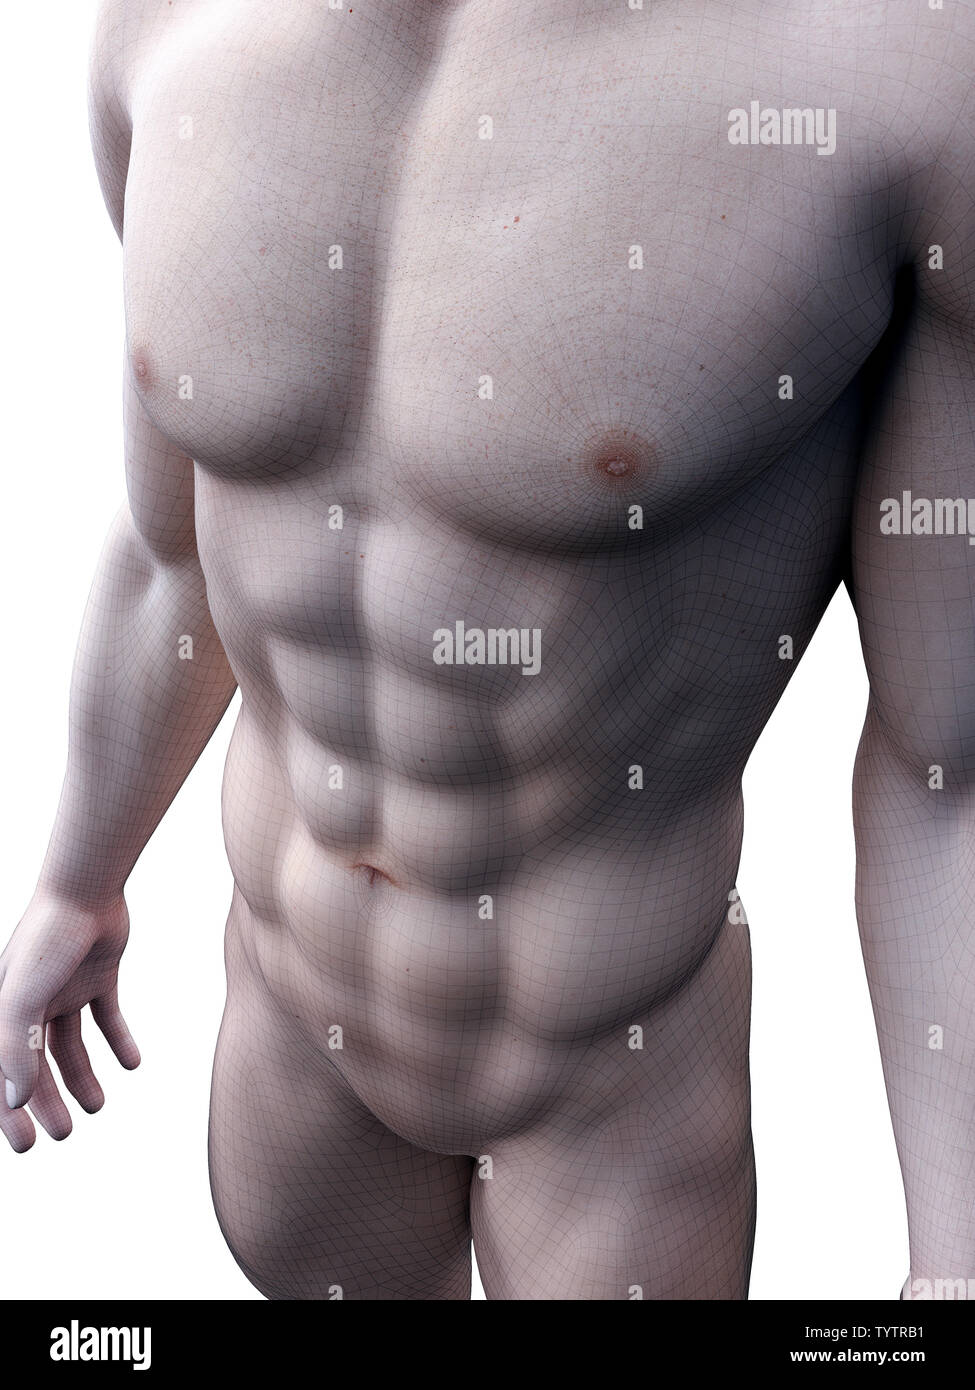 3d rendered medically accurate illustration of sixpack abs Stock Photo